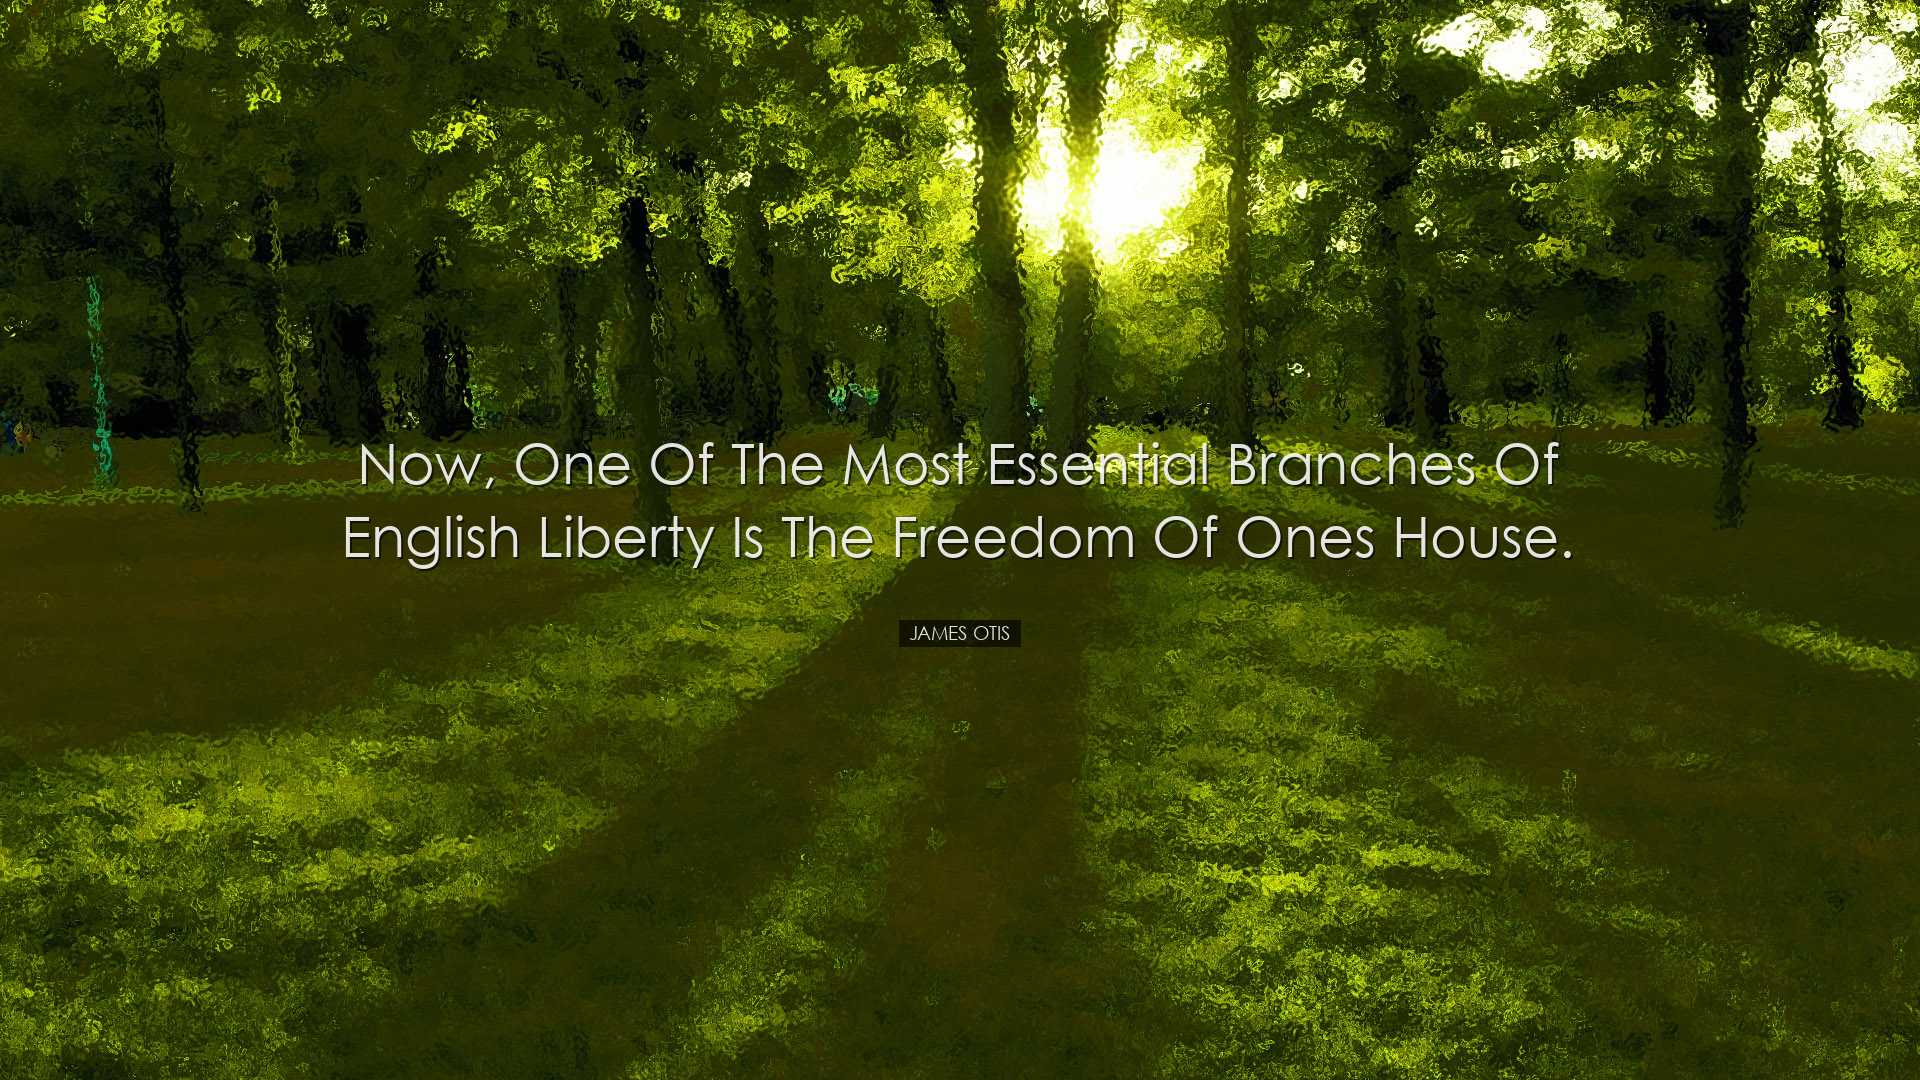 Now, one of the most essential branches of English liberty is the